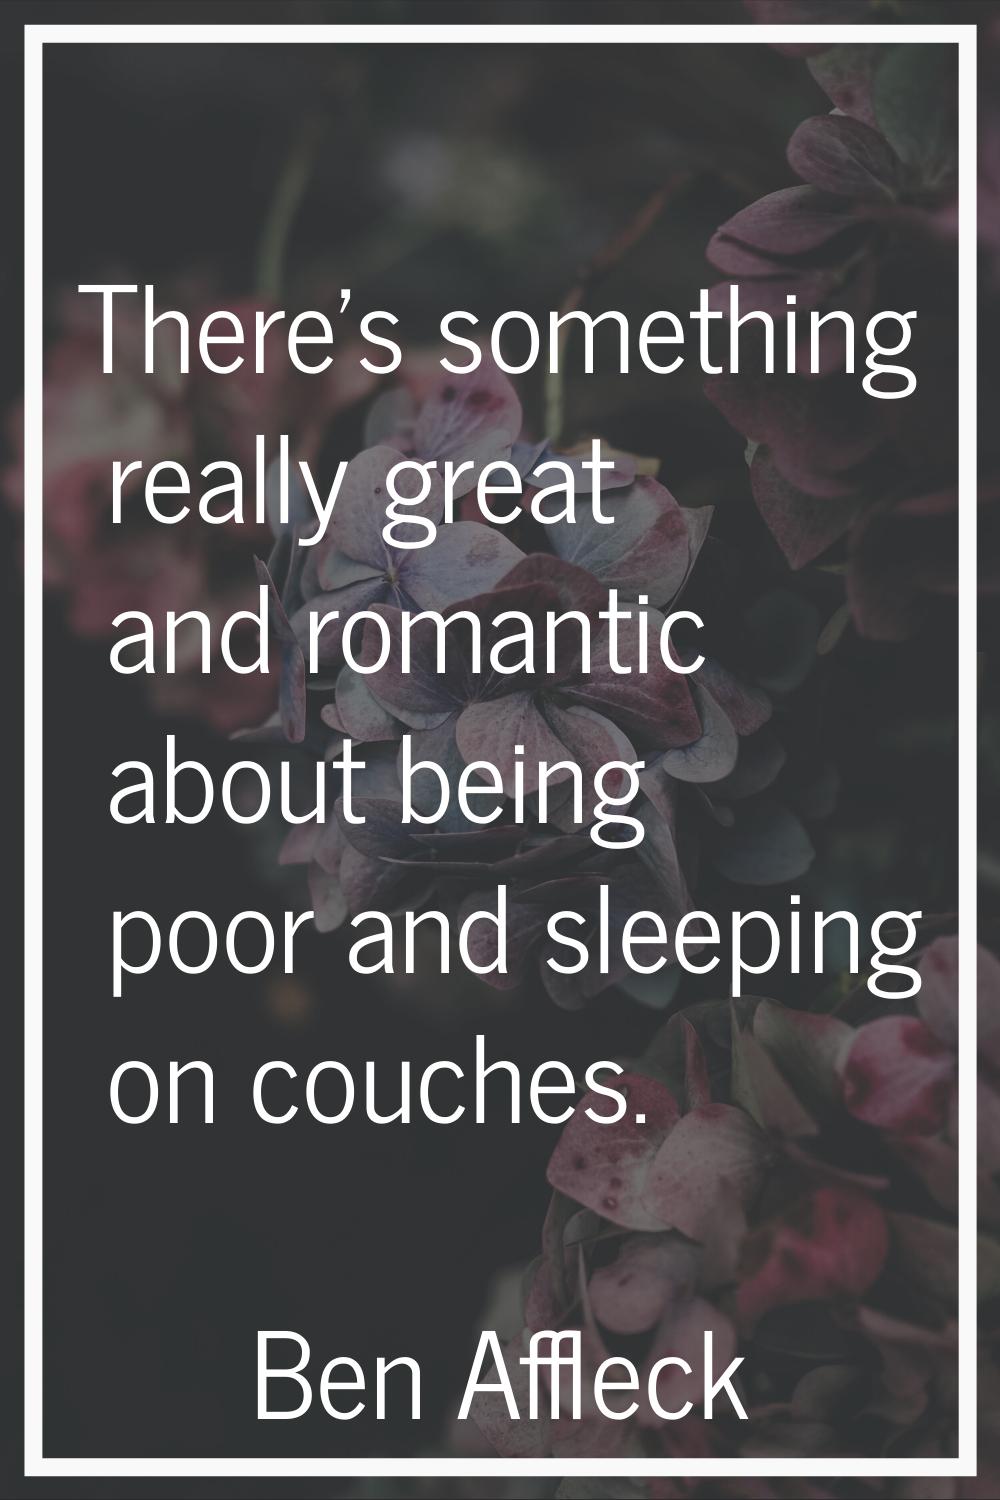 There's something really great and romantic about being poor and sleeping on couches.